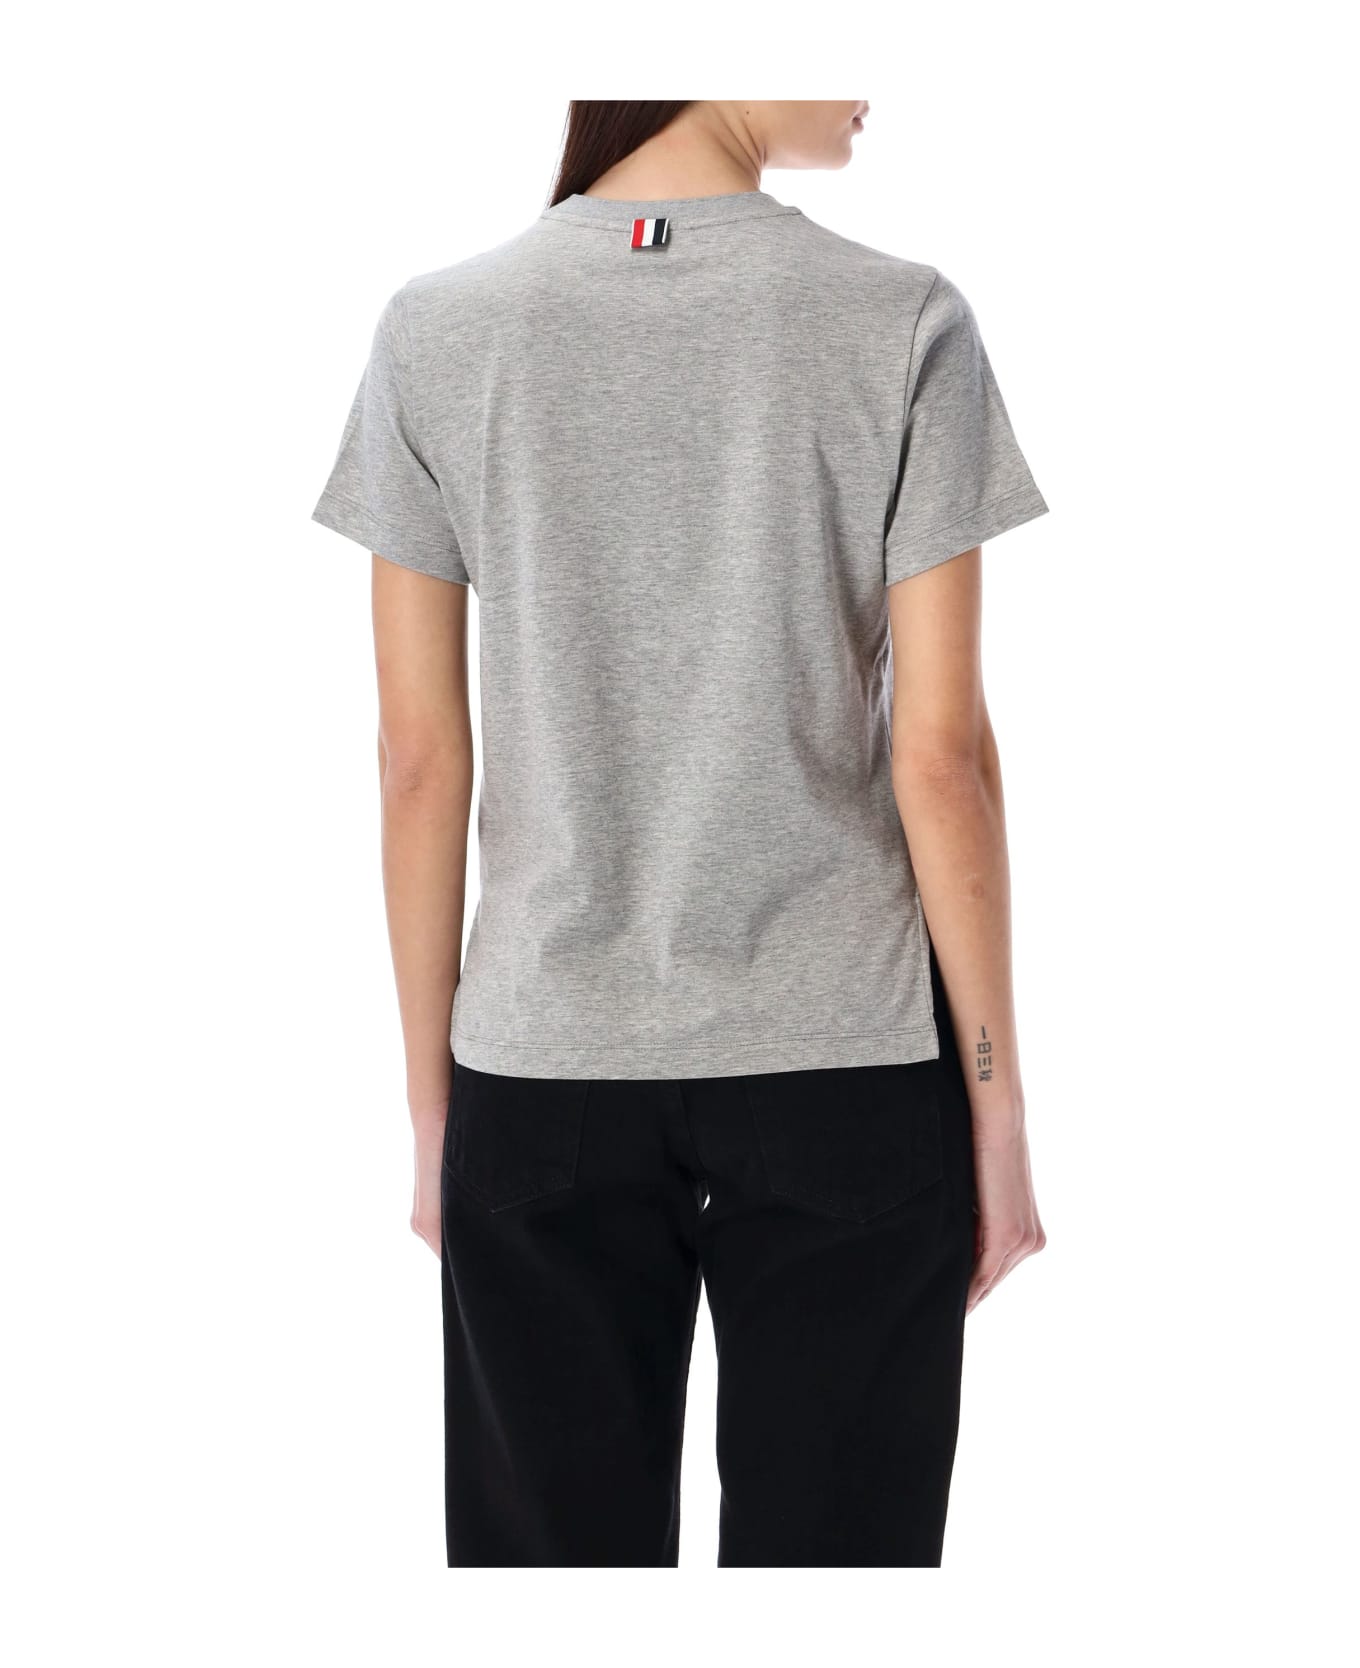 Thom Browne Relaxed Fit T-shirt - LIGHT GREY